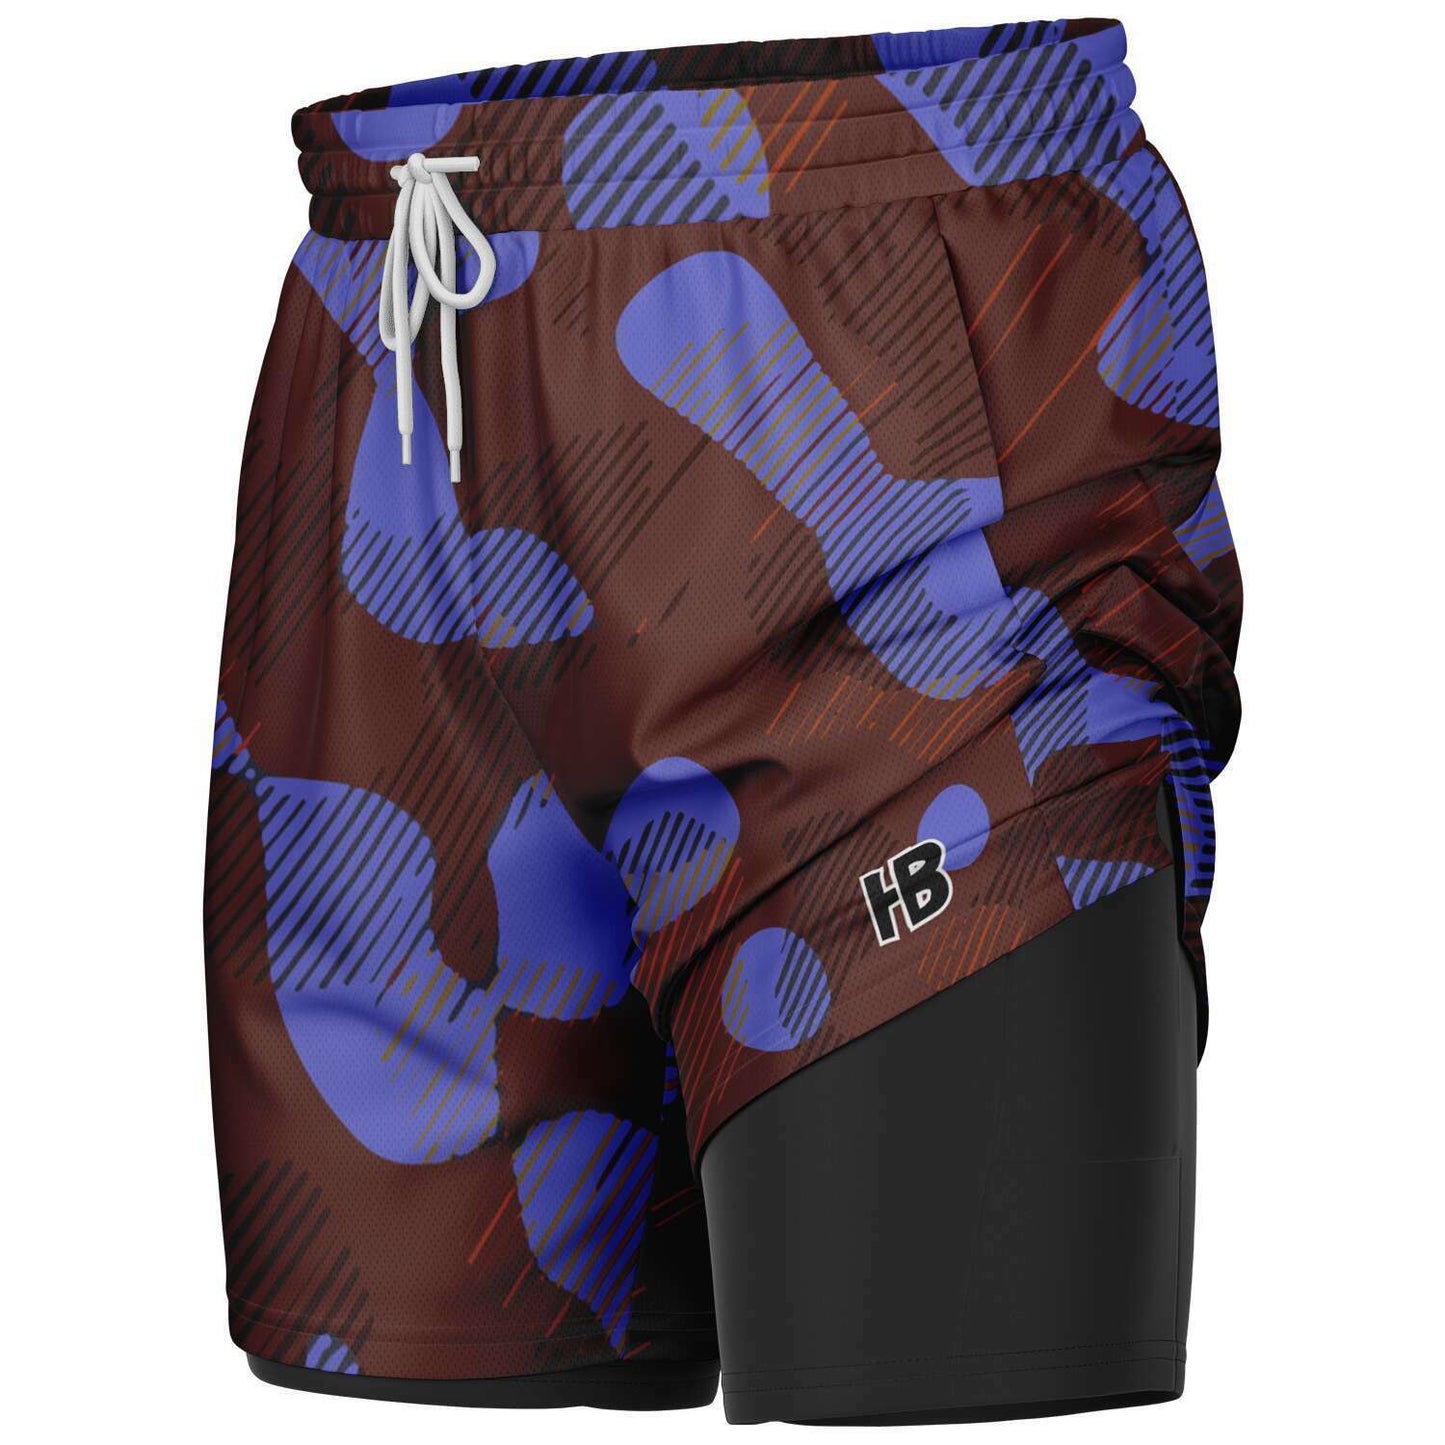 BuBbLeS mEn AnD wOmEn 2 In 1 ShOrTs